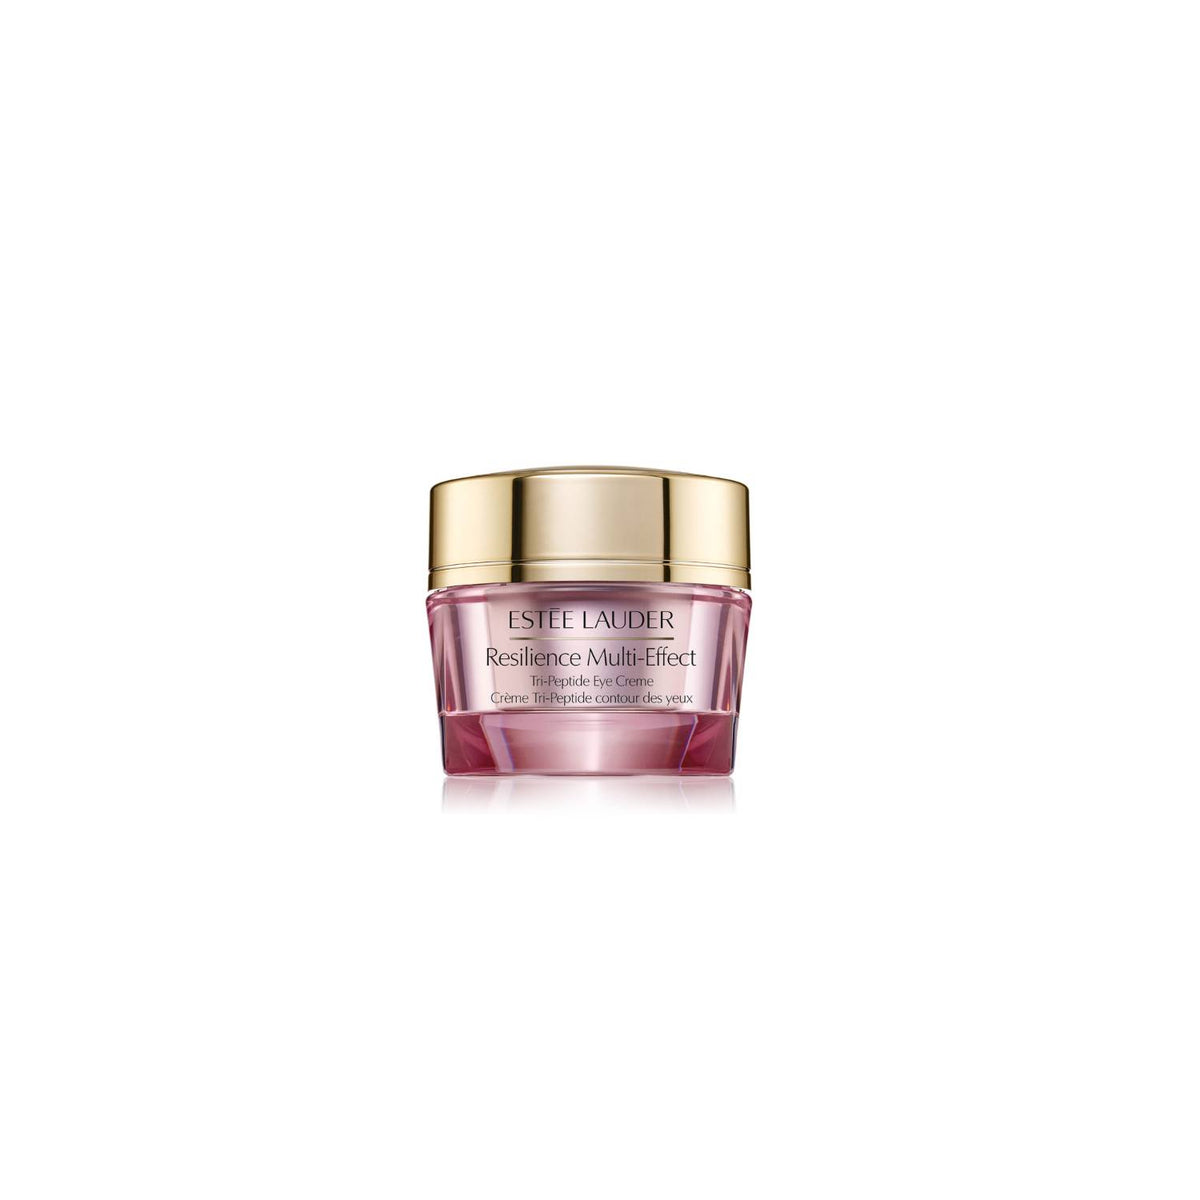 Resilience Lift Multi-Effect Firming/Lifting Eye Cream